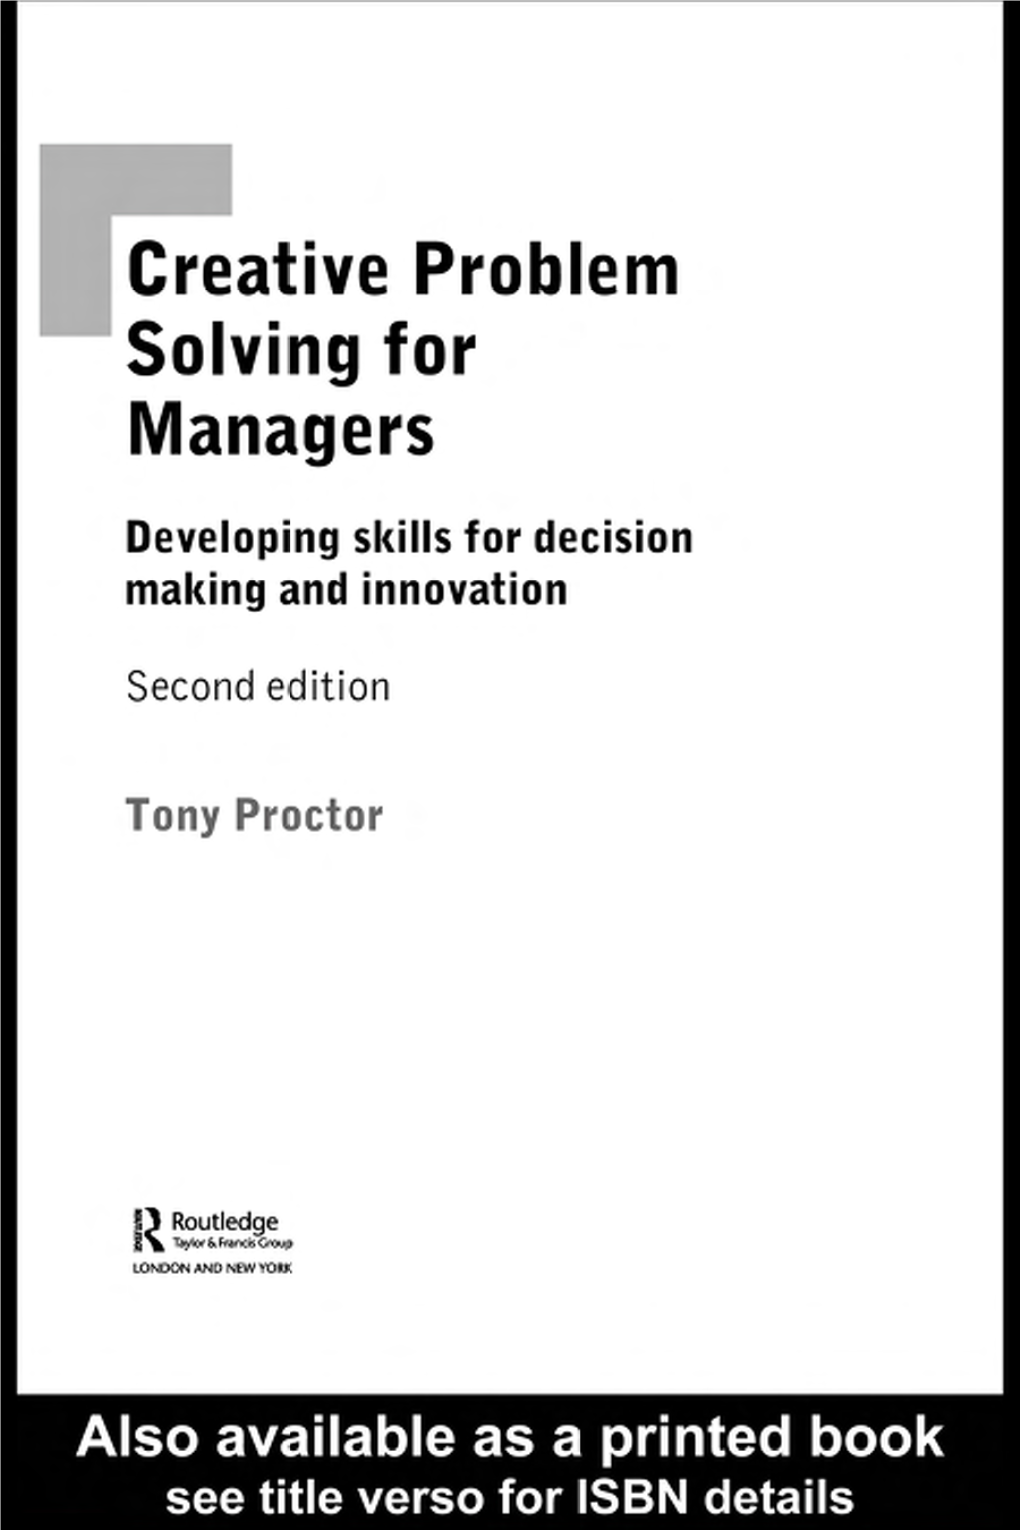 Creative Problem Solving for Managers Second Edition